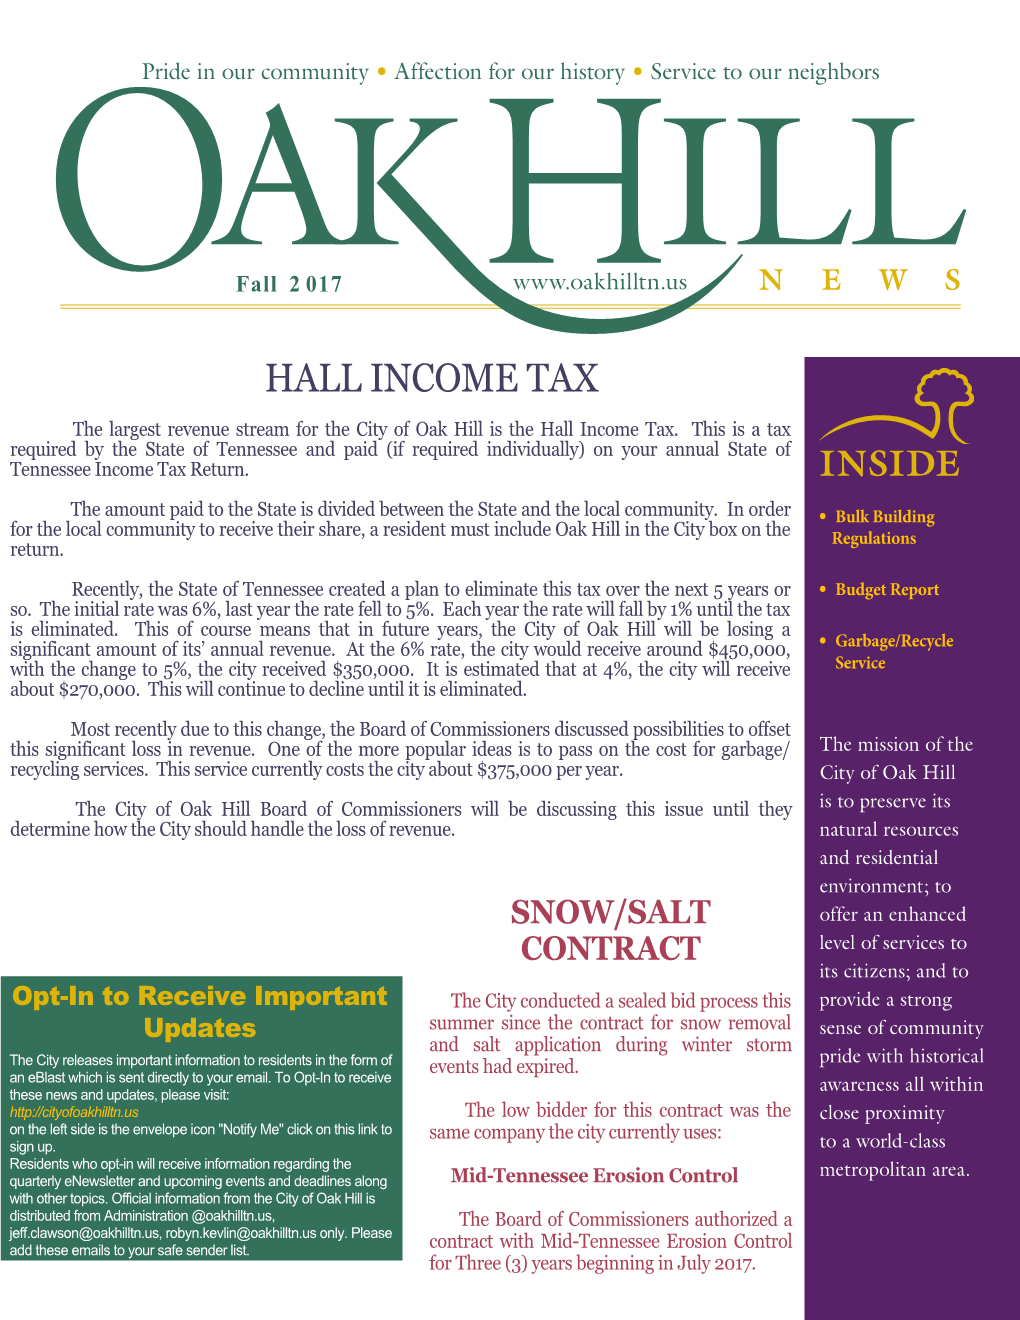 HALL INCOME TAX the Largest Revenue Stream for the City of Oak Hill Is the Hall Income Tax